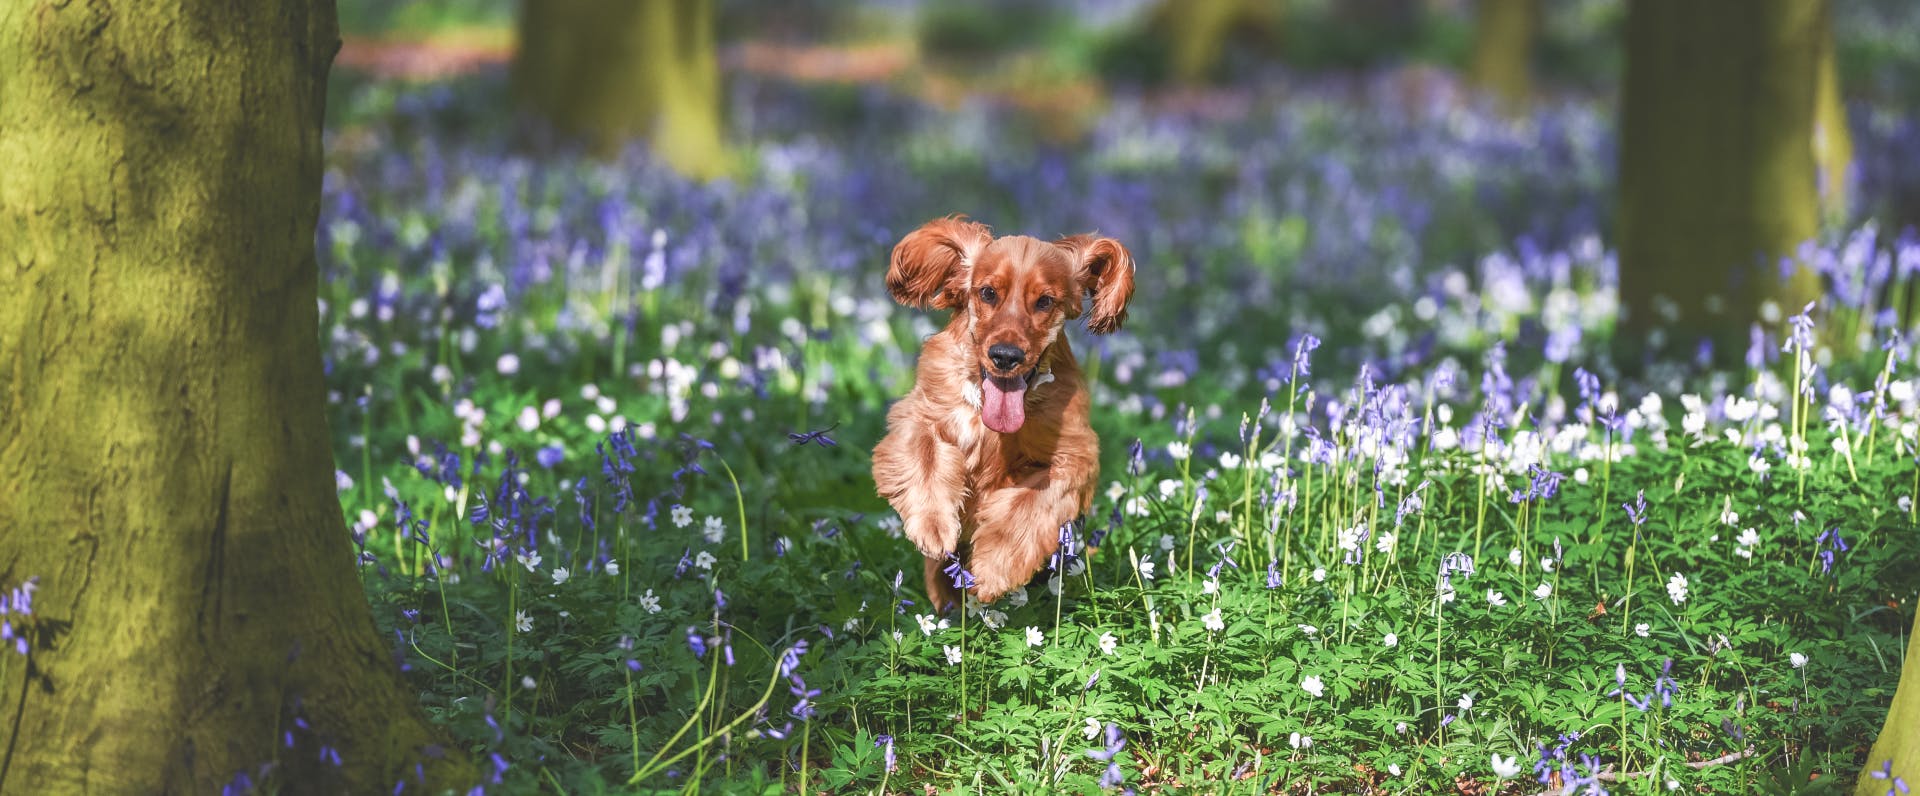 a brown spaniel running through a forest floor covered in bluebells and snowdrops